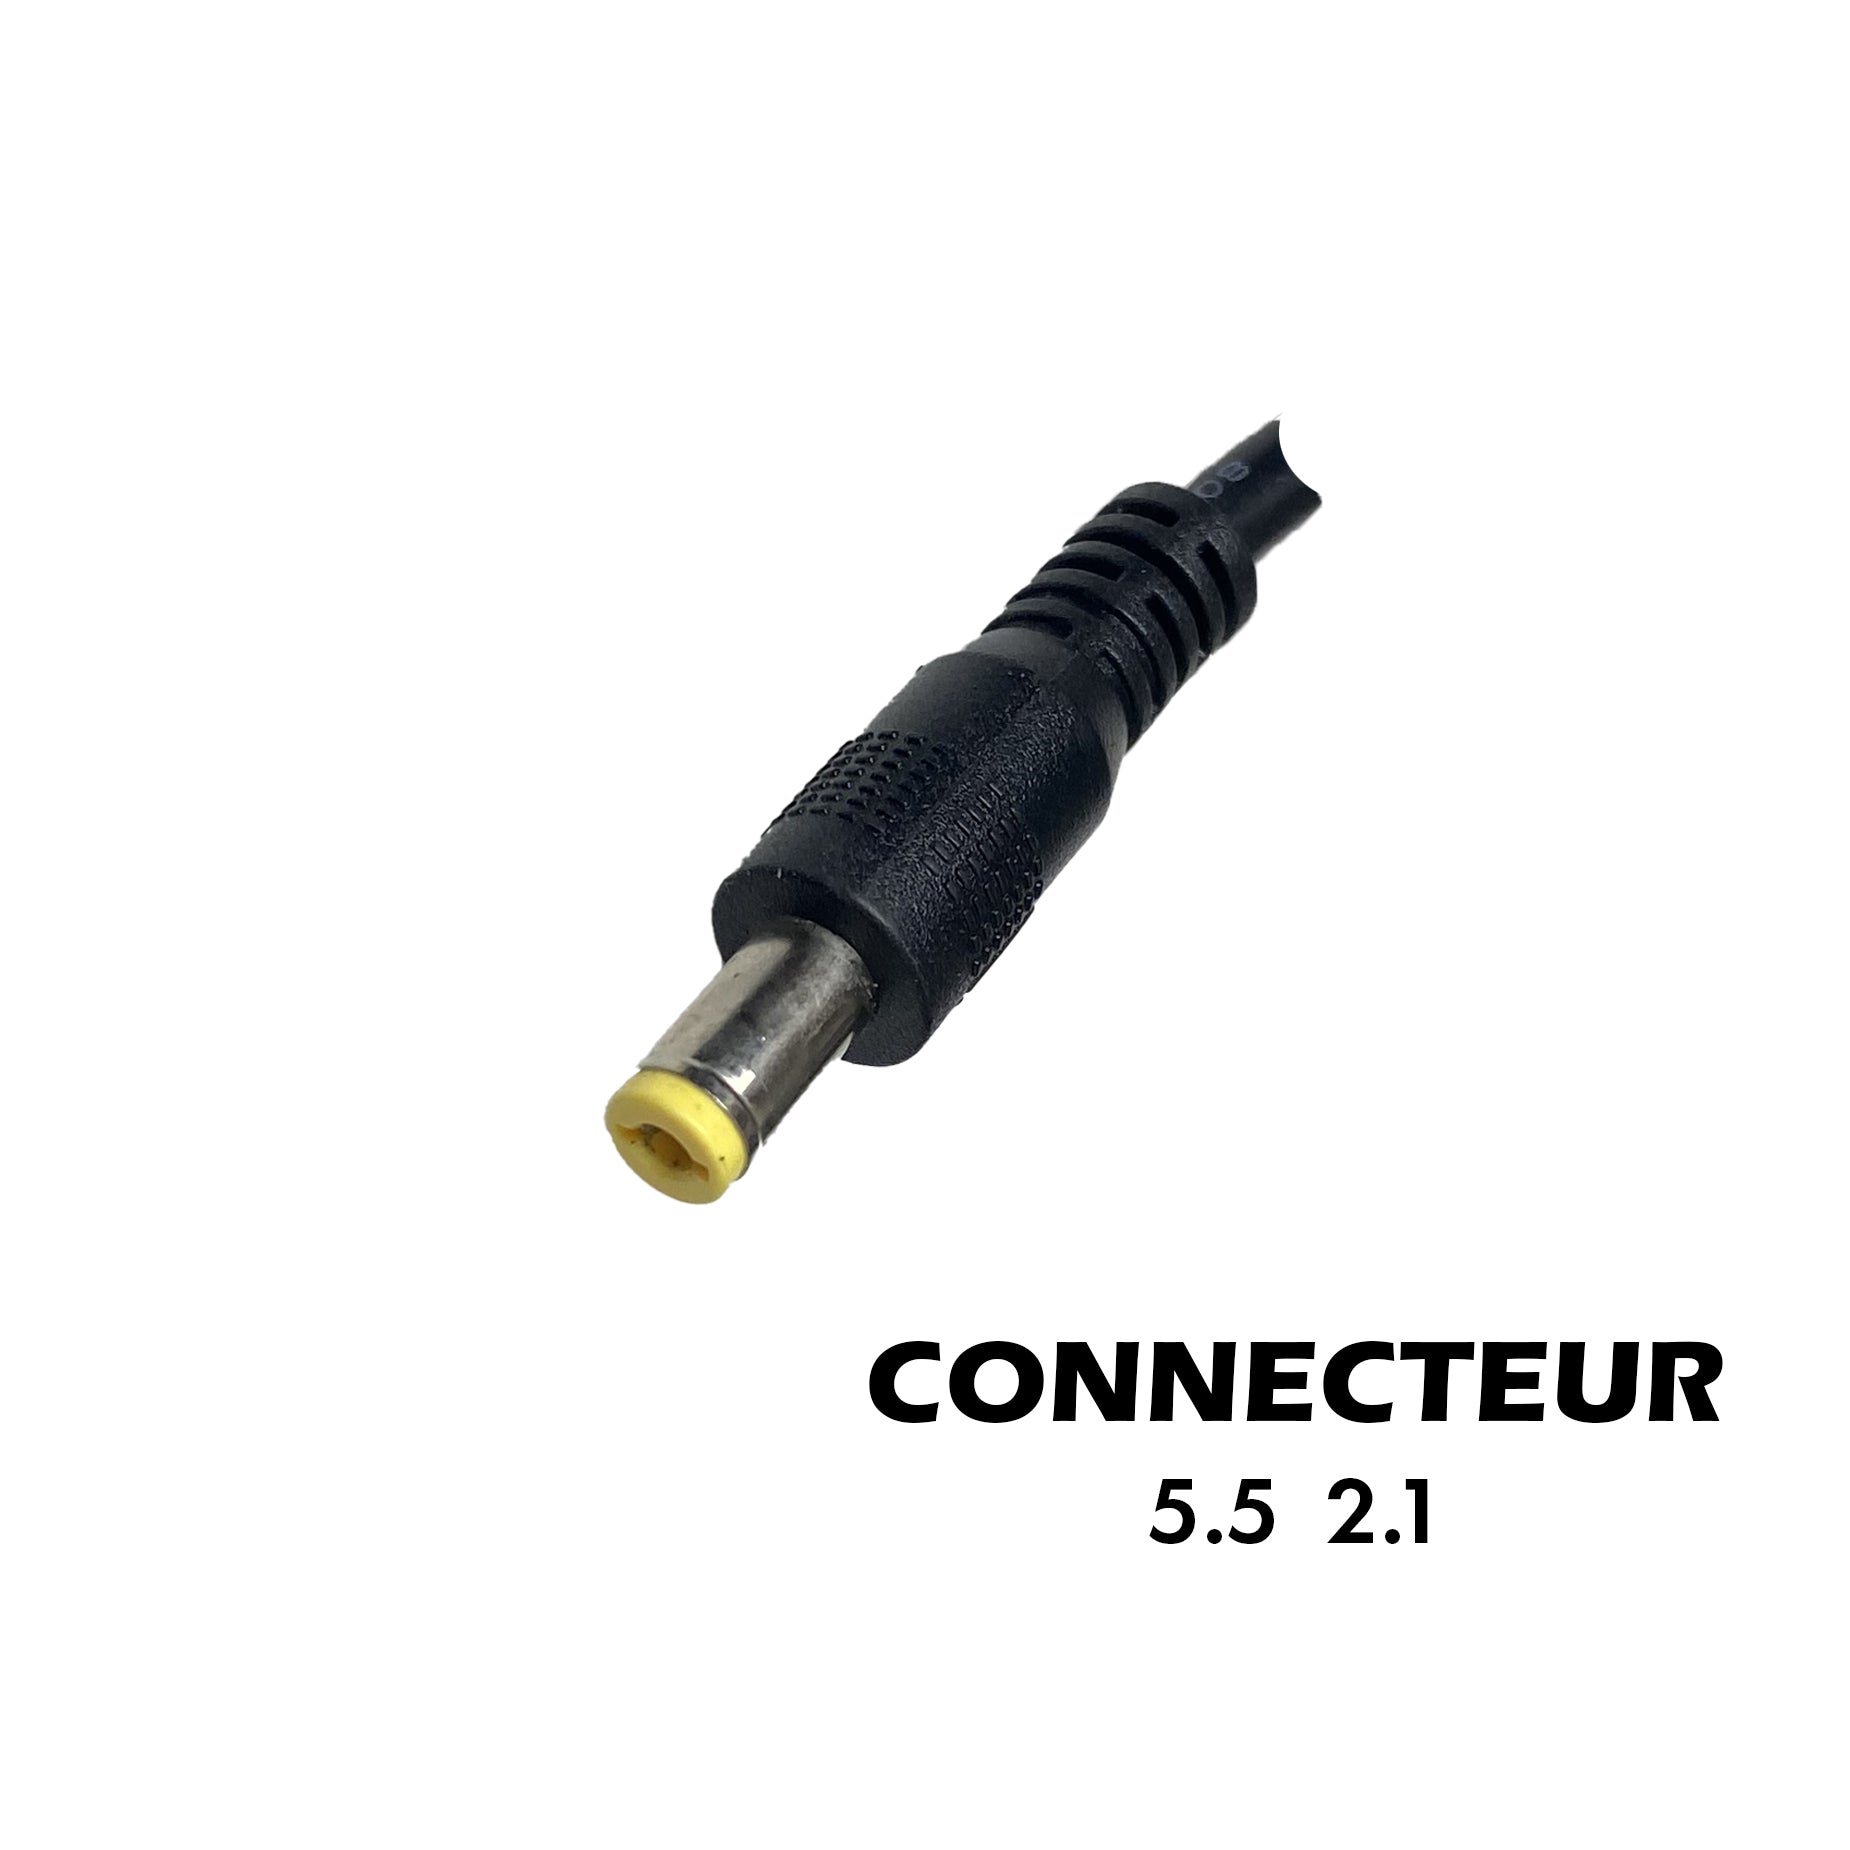 Chargeur 42V / 2A connecteur DC 5.5*2.1MM Miscooter Booster